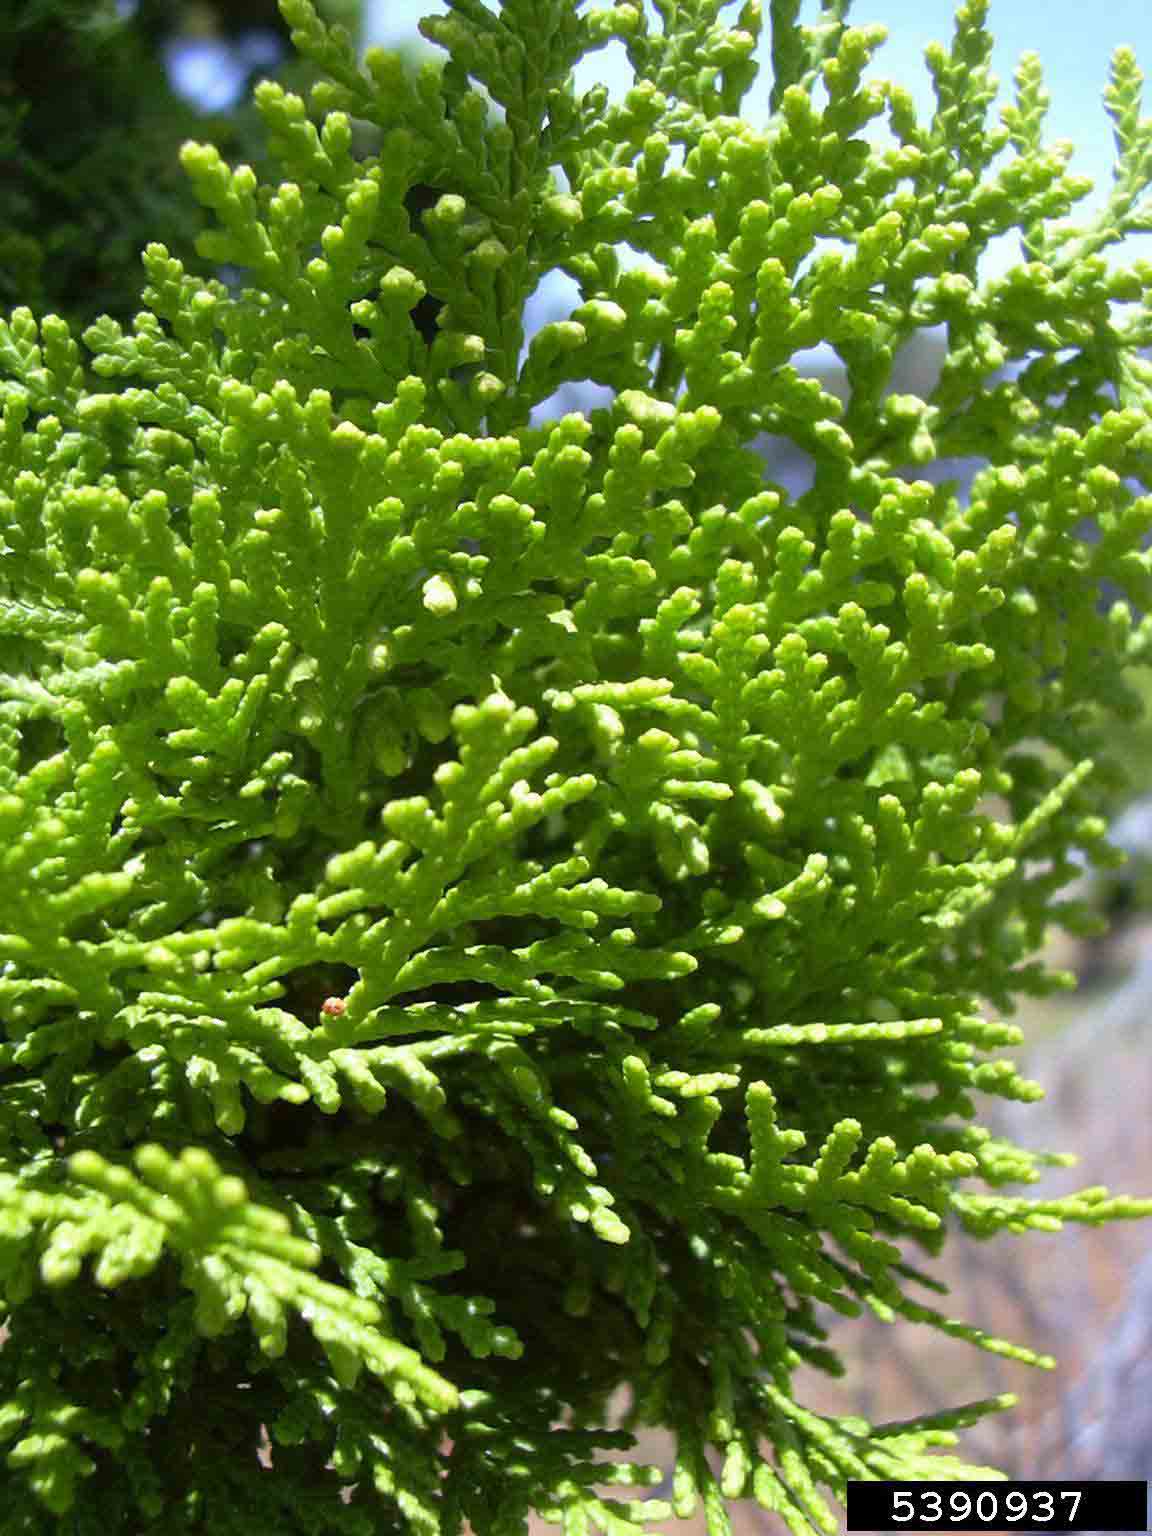 Eastern arborvitae foliage, showing overlapping scales